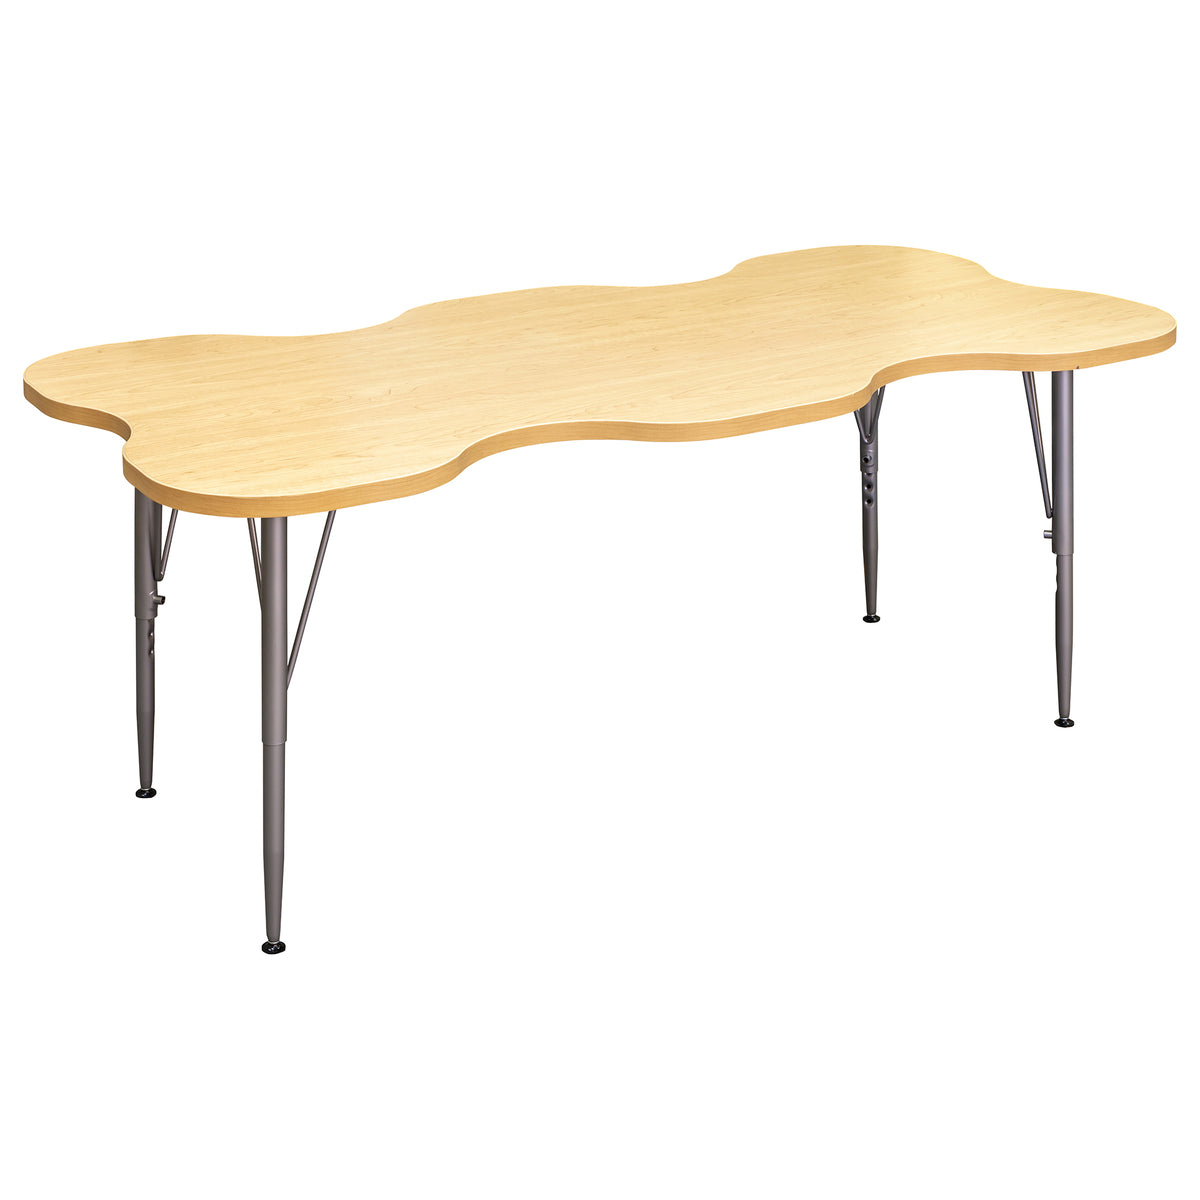 Six Seat Rectangular Childs Table with Adjustable Height Legs.